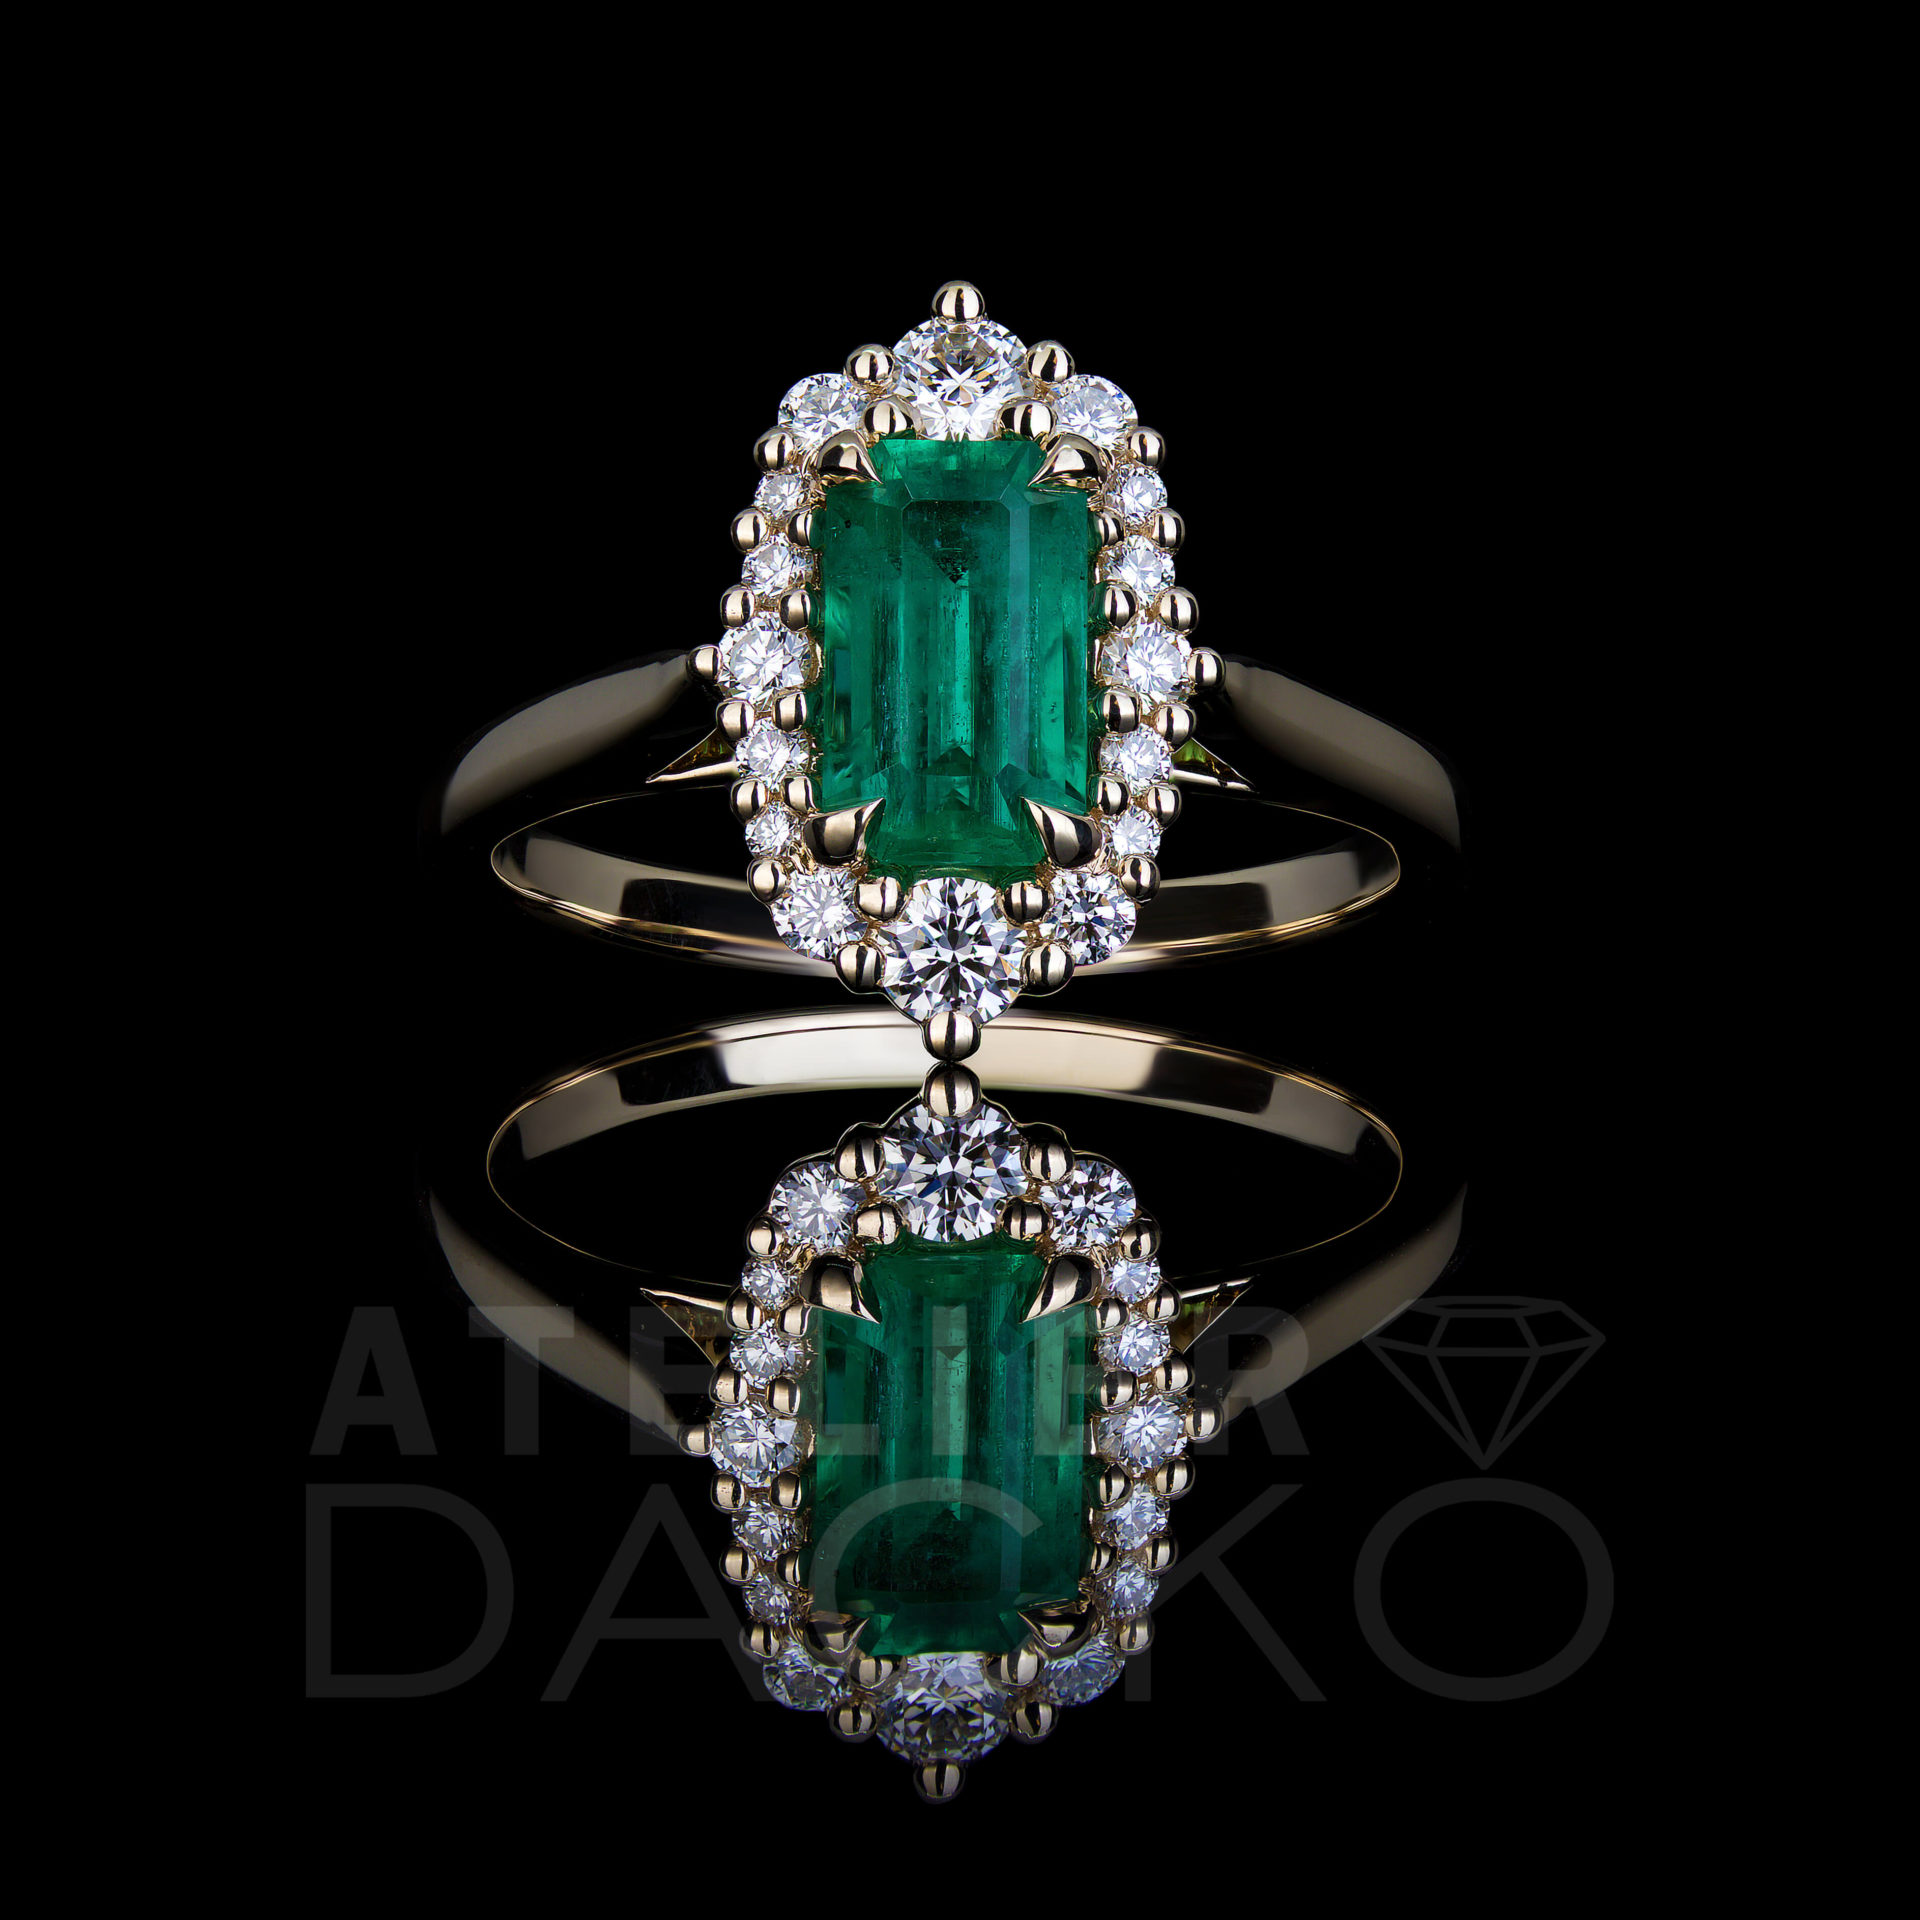 AD065-1.12 CT Emerald Ring with a Modern Vintage Diamond Halo-2